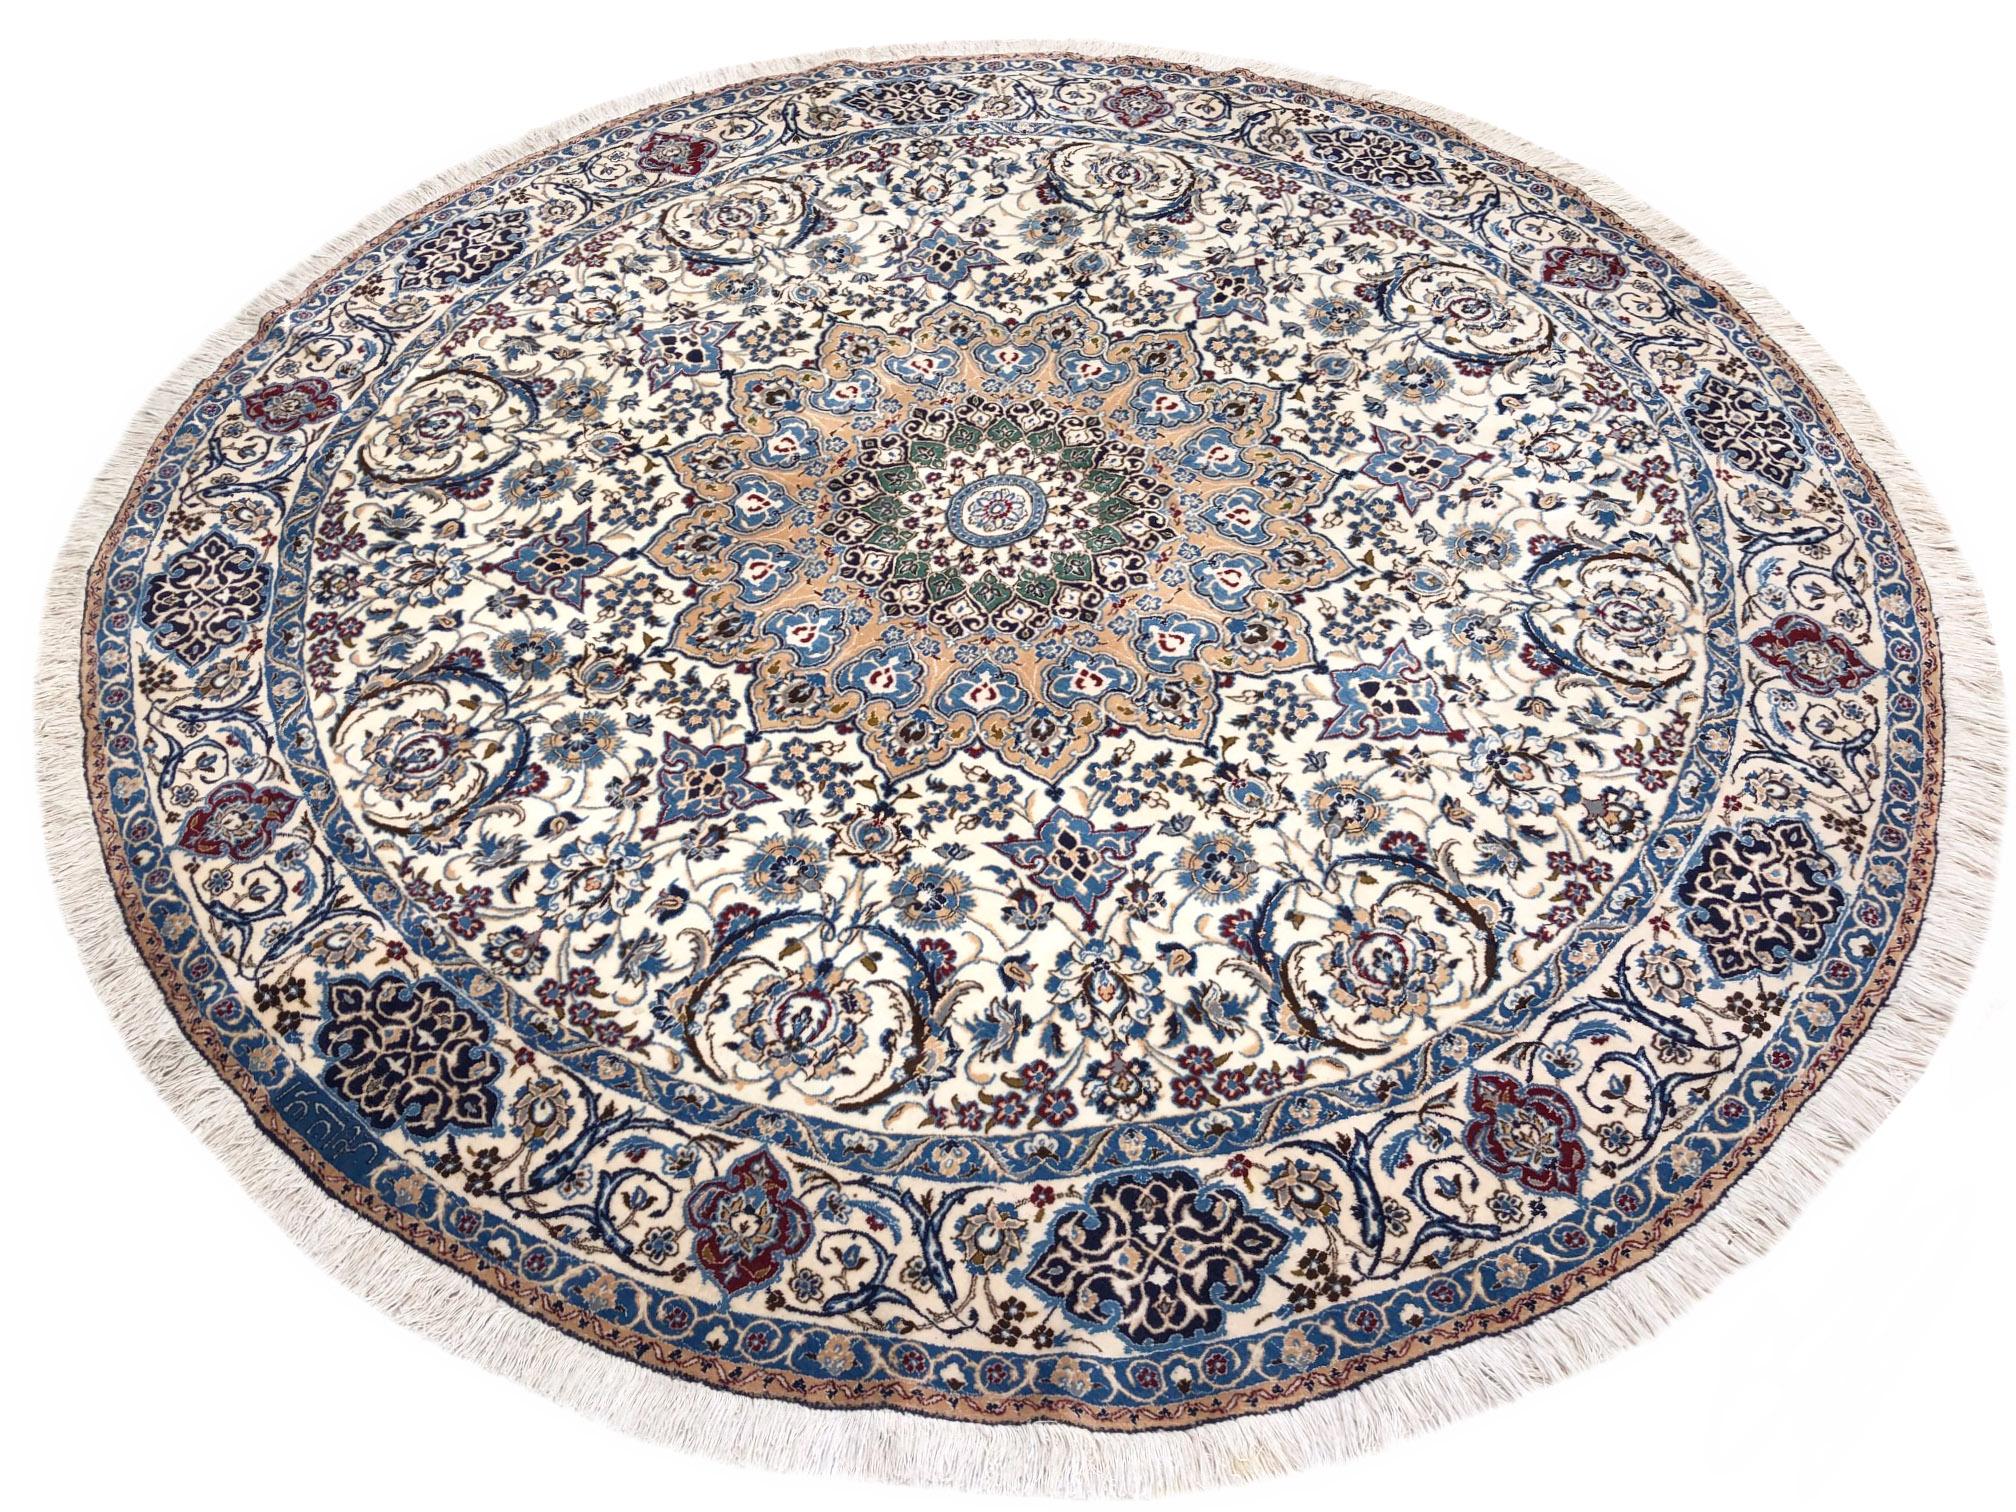 This authentic Persian round hand-made Nain (9 LA) rug has wool and silk pile with cotton foundation. Nain is a city in Iran that is well known for producing fine handmade rug. This rug has medallion floral design. The base and border color is